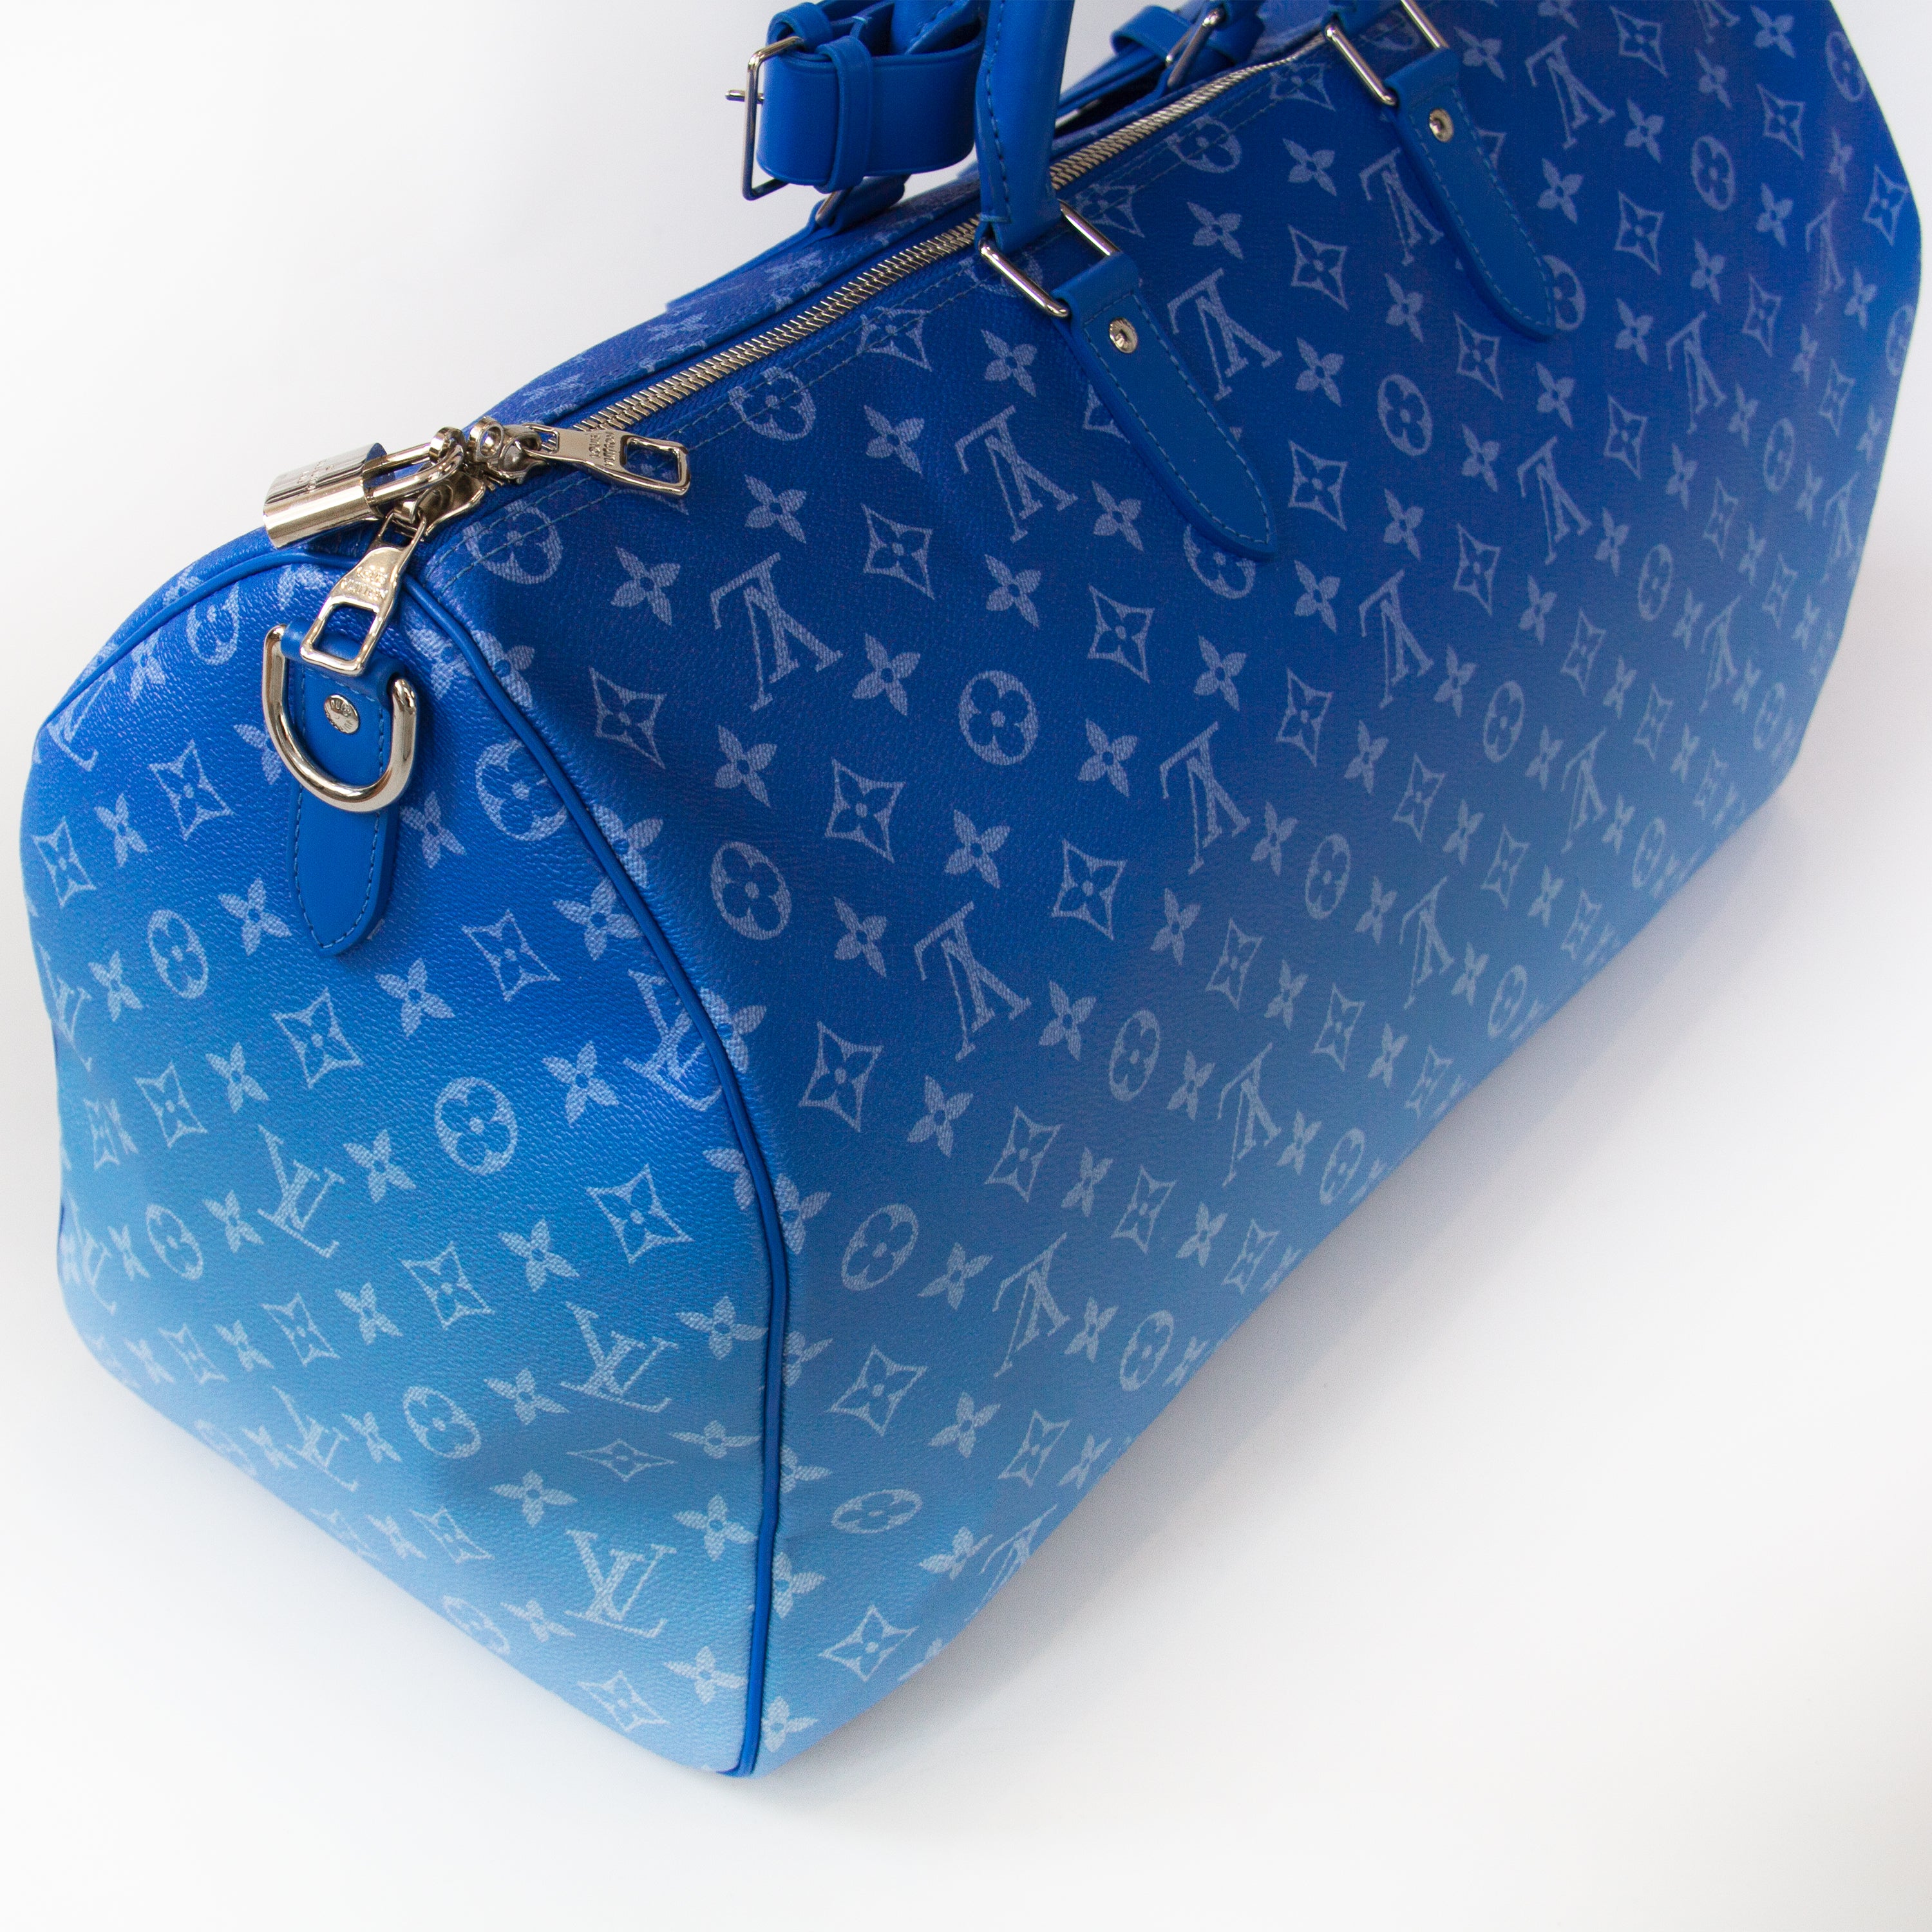 Louis Vuitton Keepall Bandouliere Bag Limited Edition Monogram Clouds 50